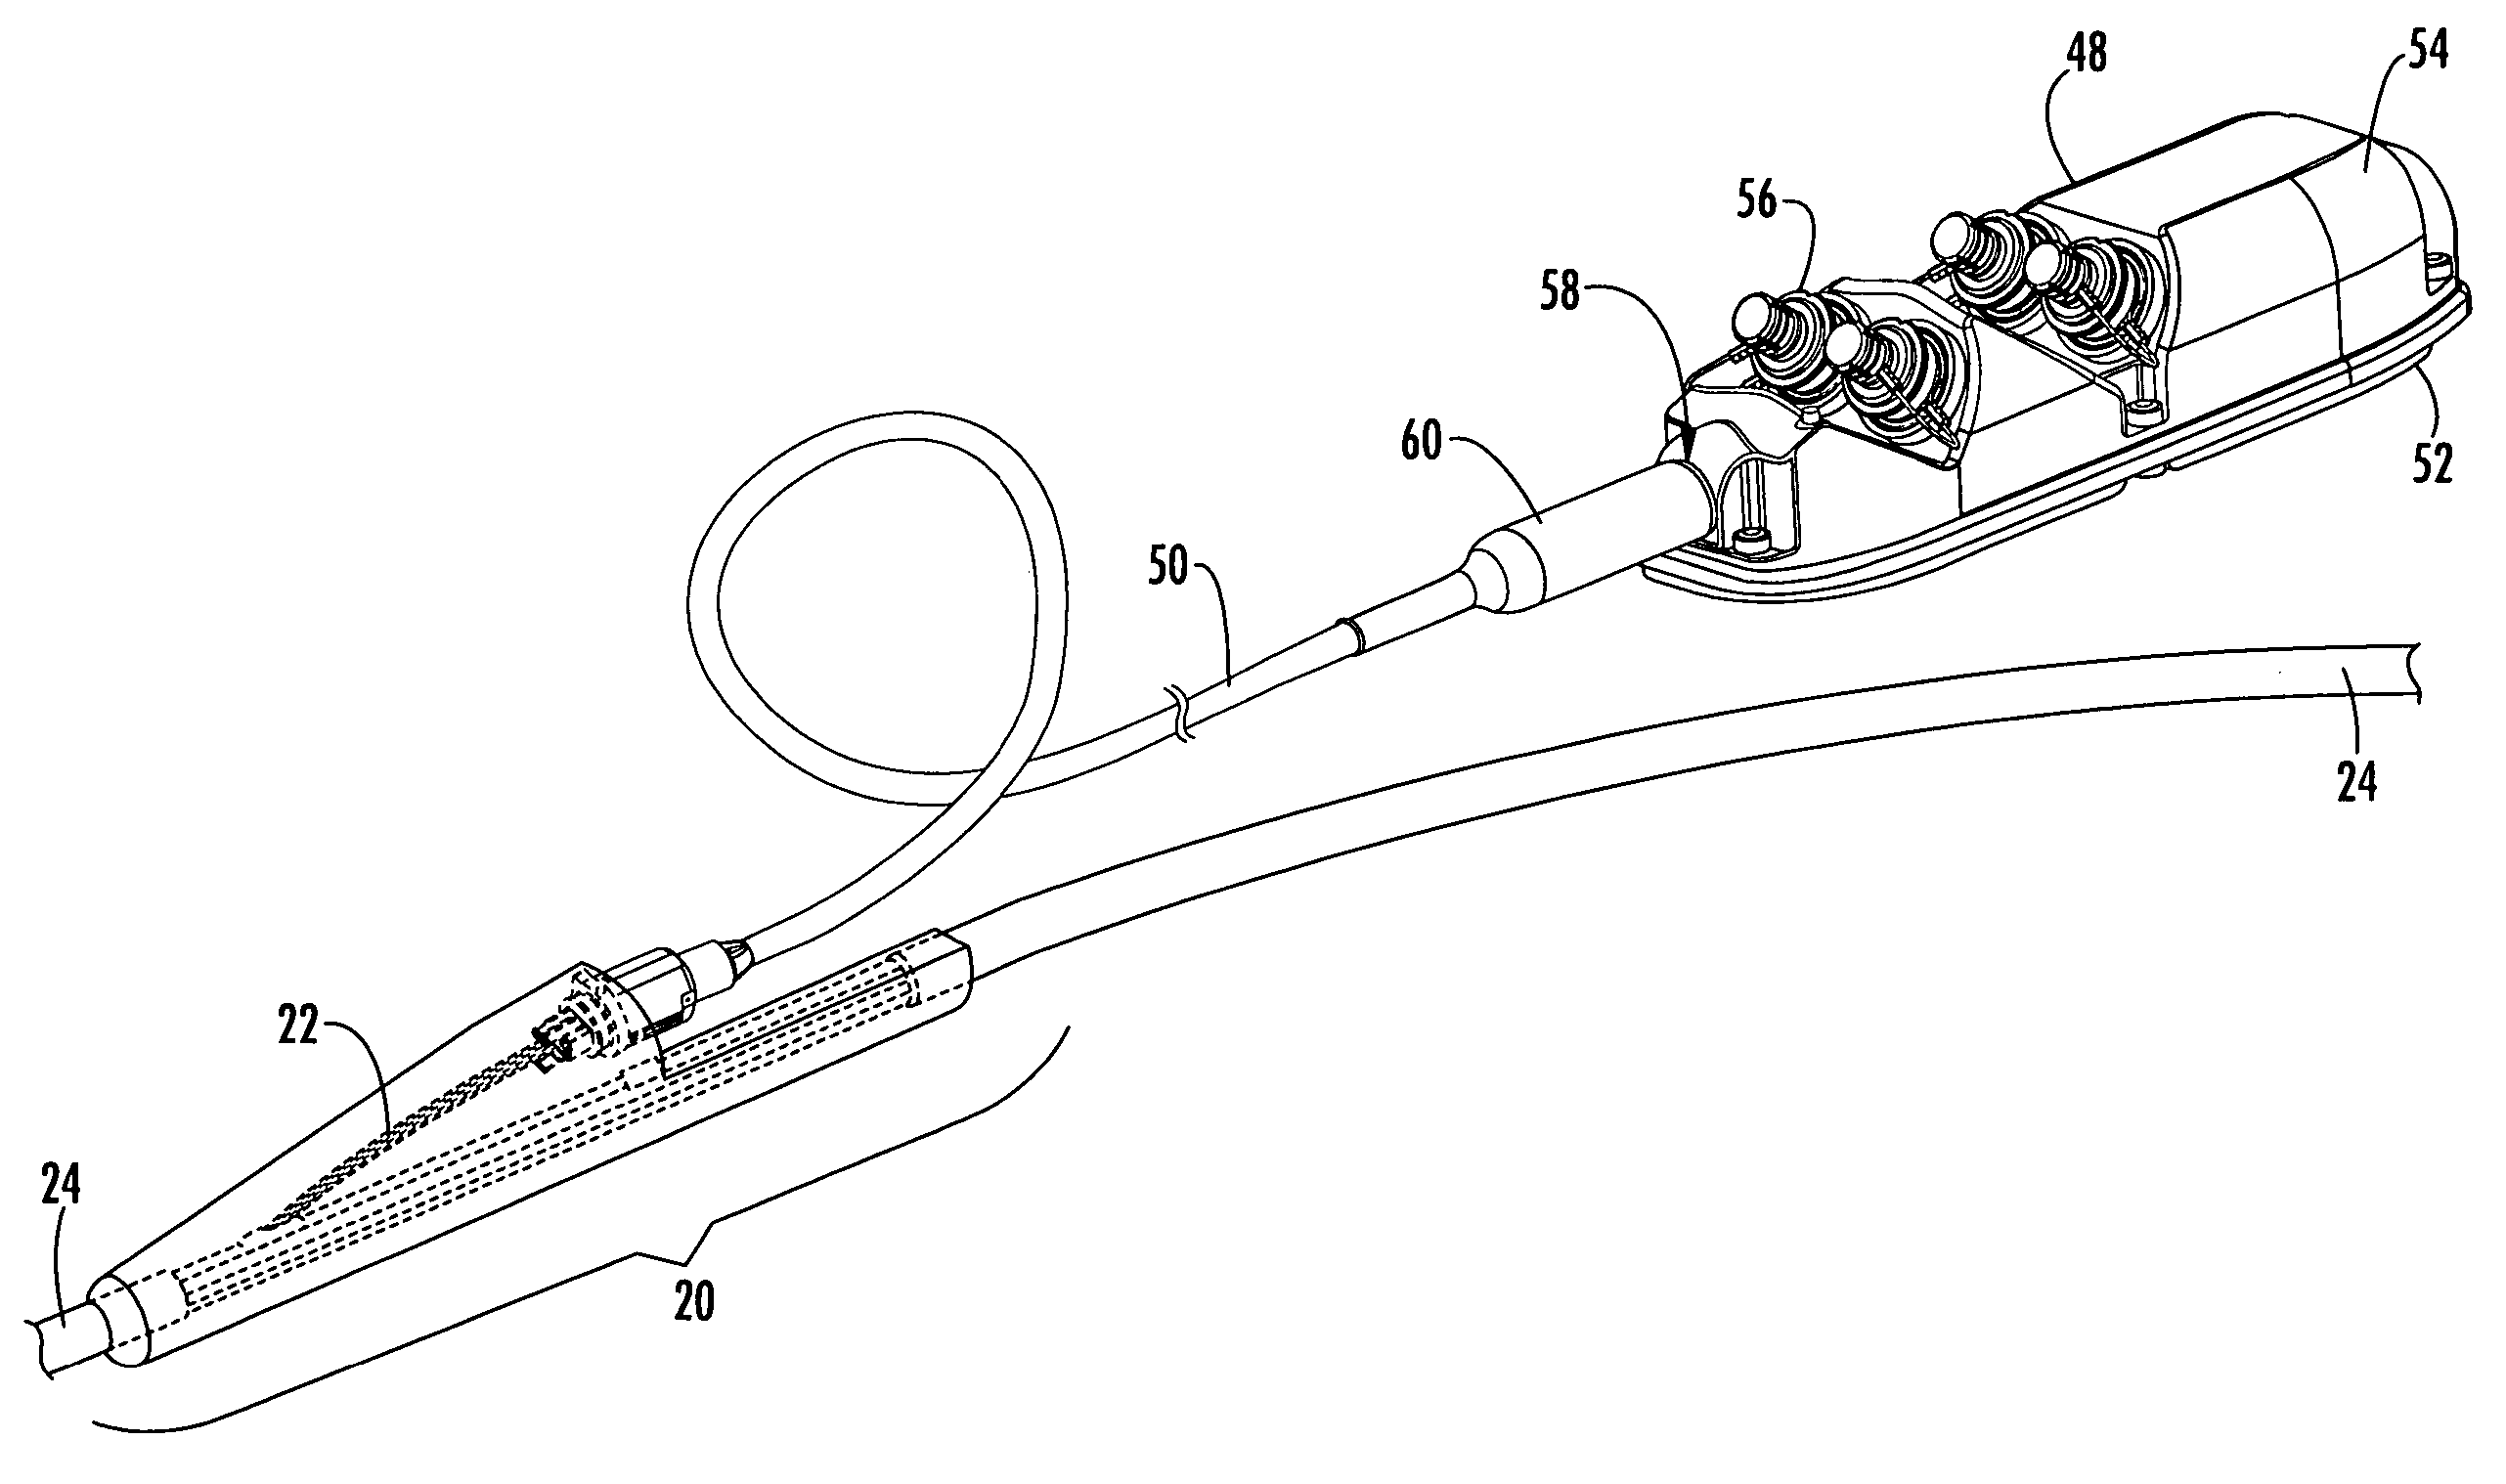 Pre-connectorized fiber optic distribution cable having overmolded access location